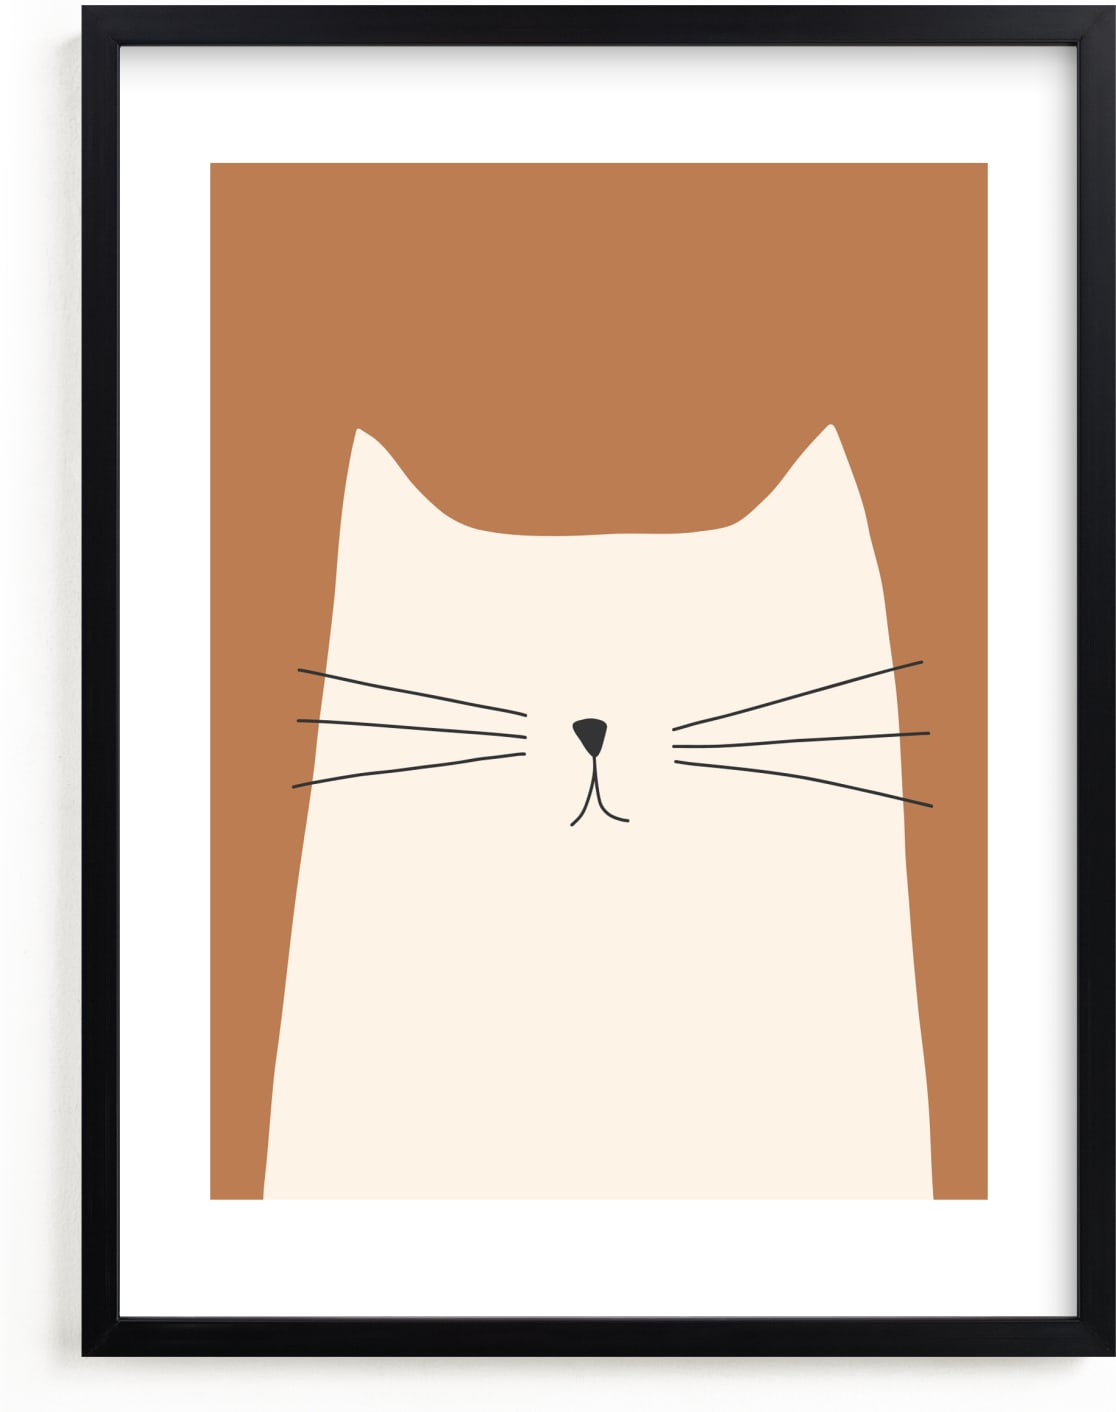 This is a brown nursery wall art by Coit Creative called House Cat.